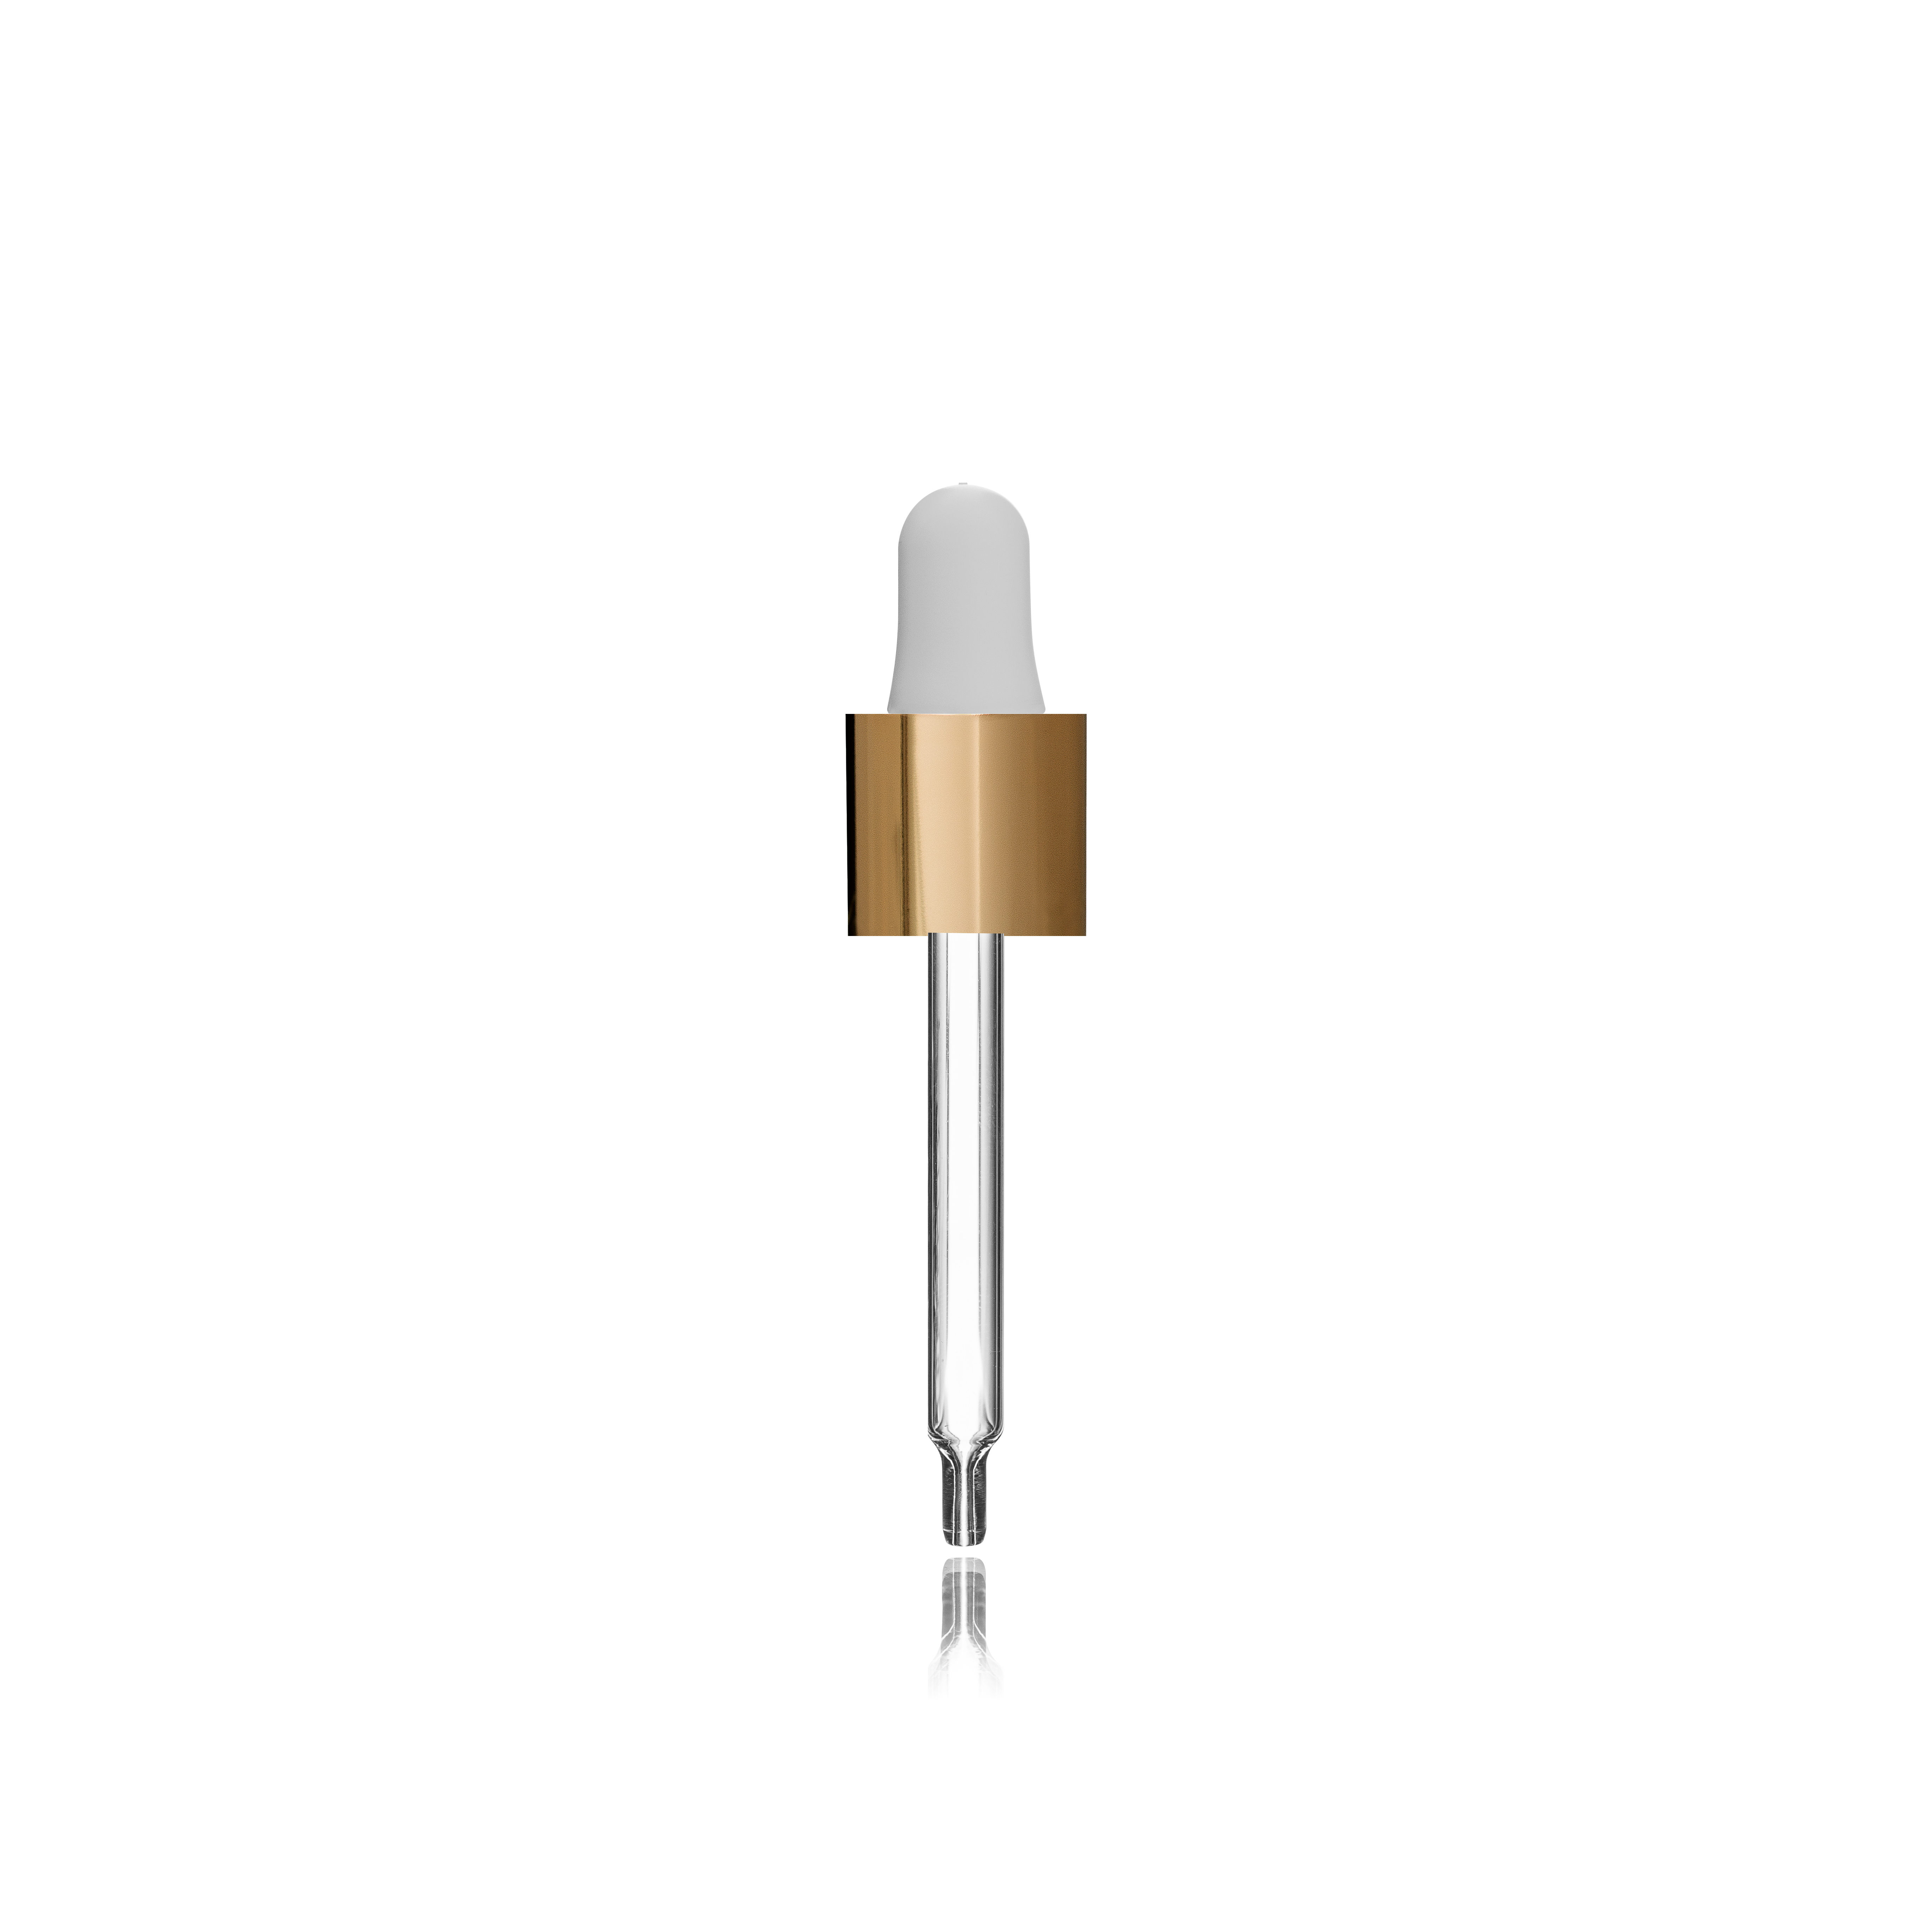 Pipette, 18/415, PP/metal, white/gold, bulb nitrile PG 0.65ml, conical tip, straight for Victor 50 ml